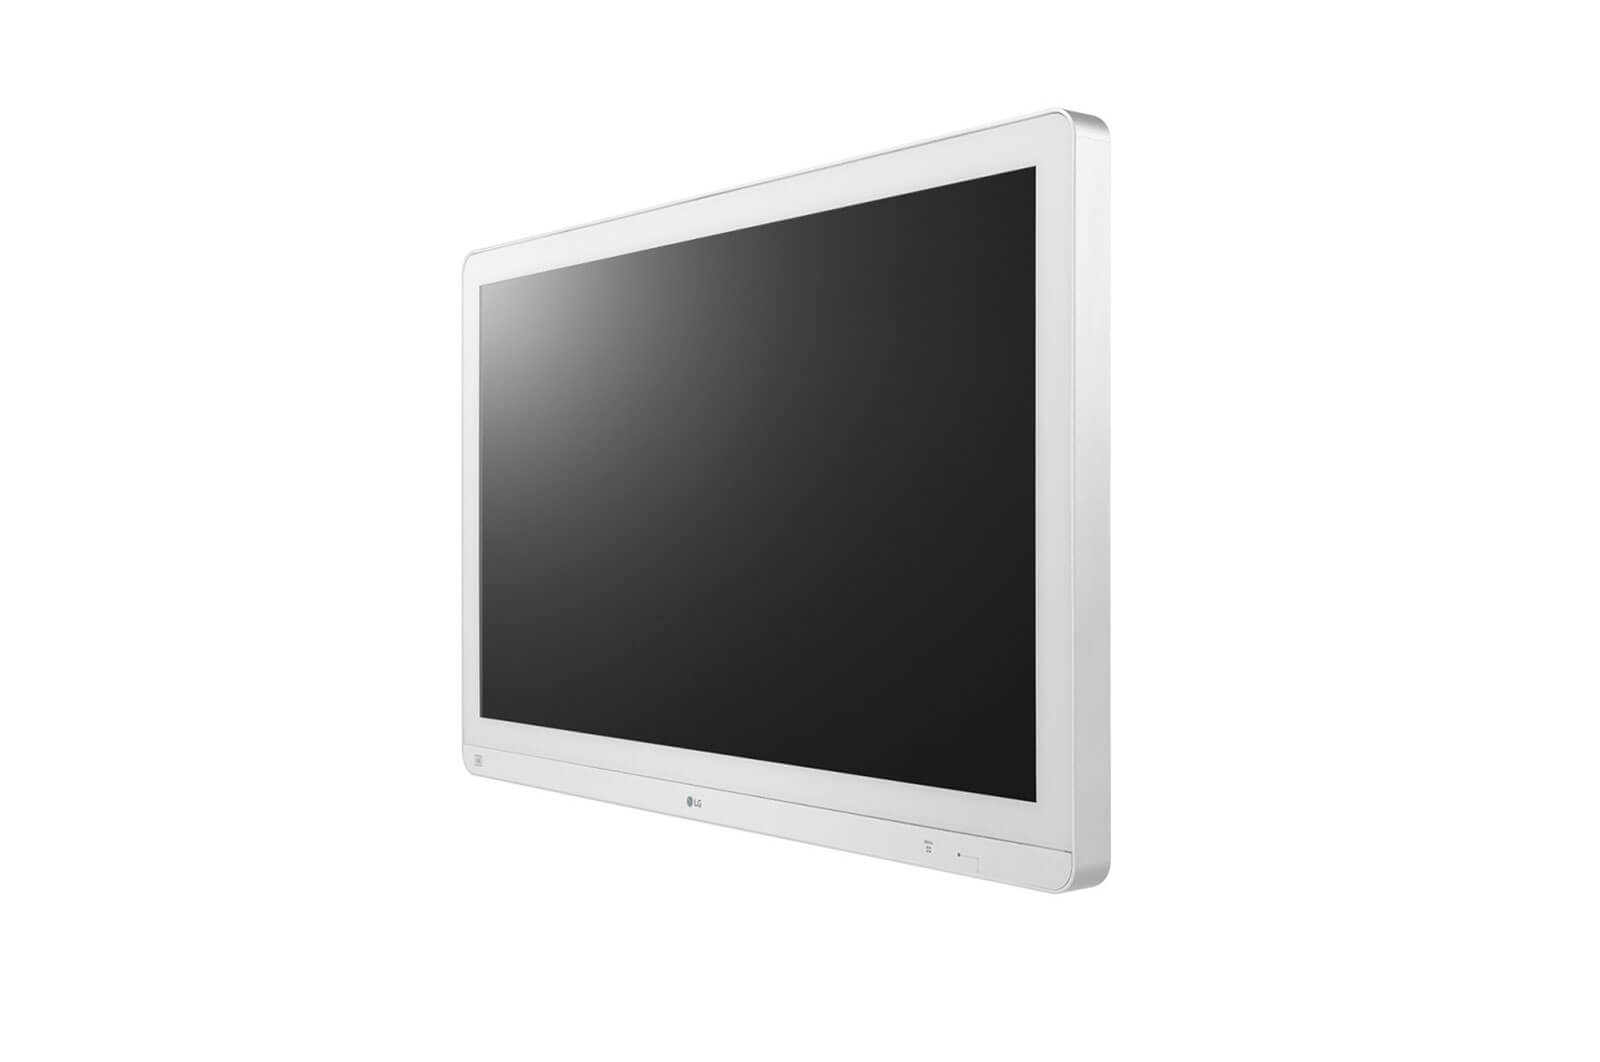 Medical monitor LG 32HL710S-W 31.5" 4K LED Surgical Display has enhanced accuracy with wide view 